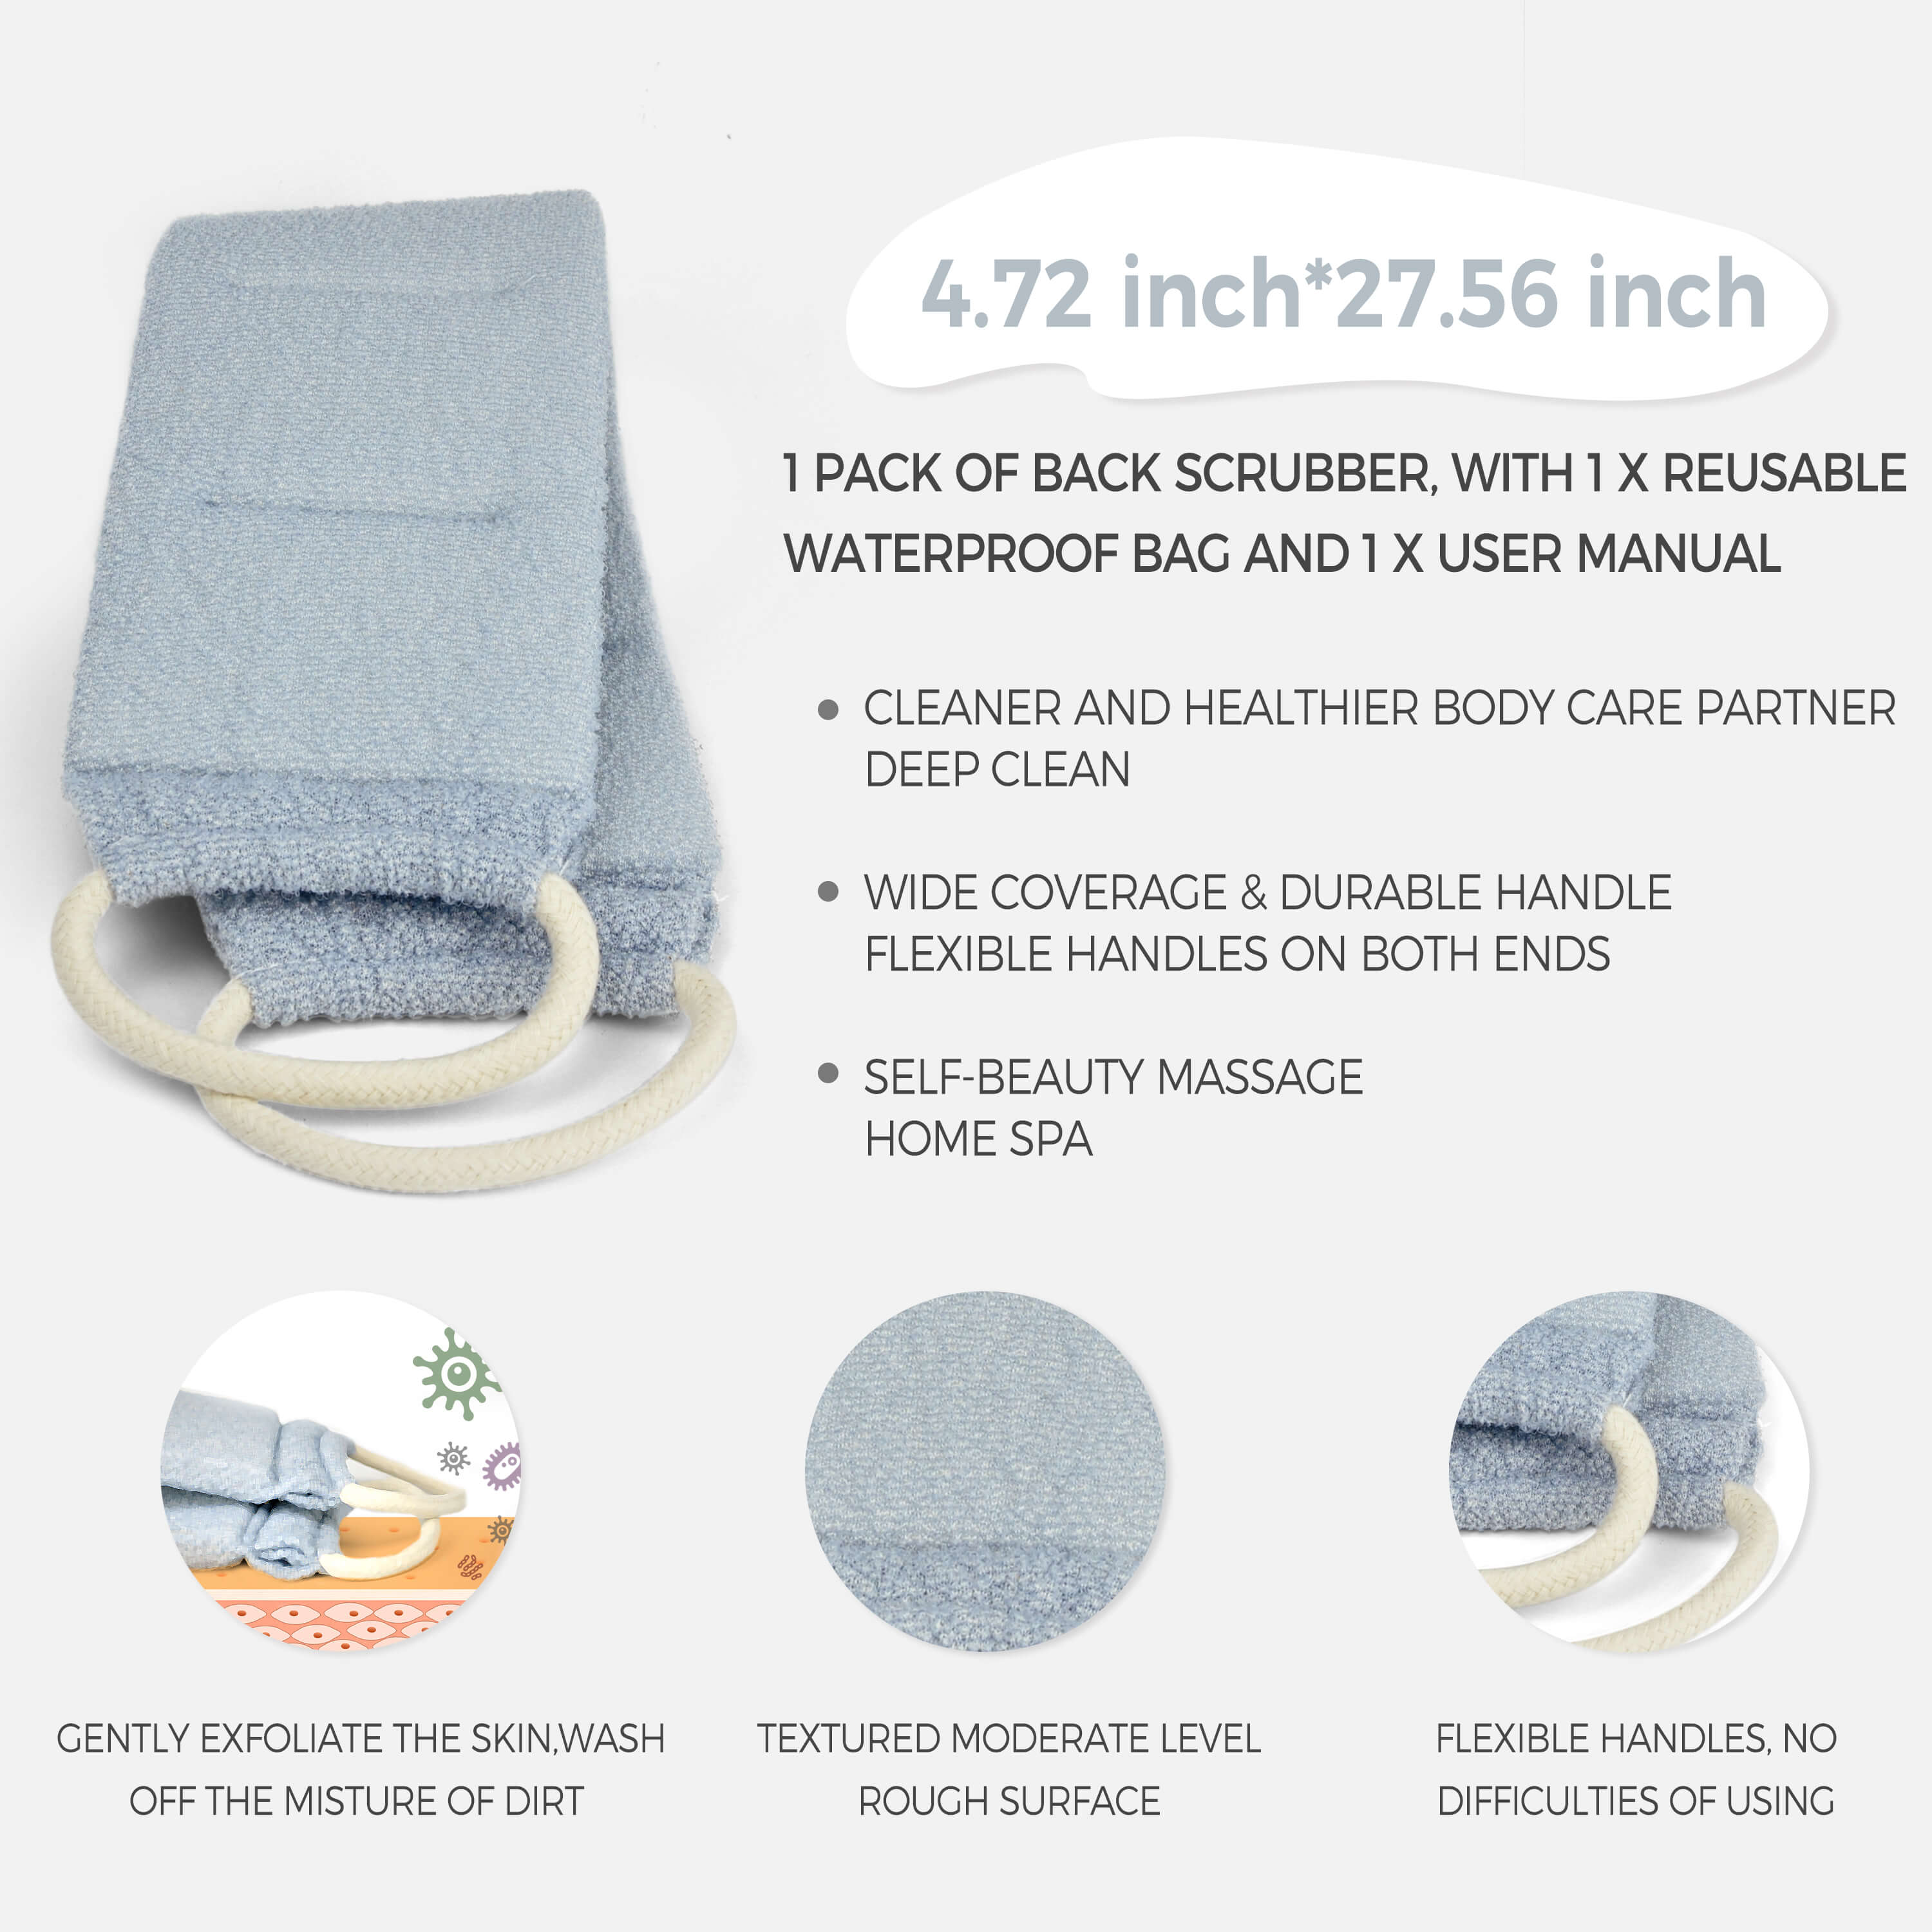 Benefit Of Zomchi Back Scrubber